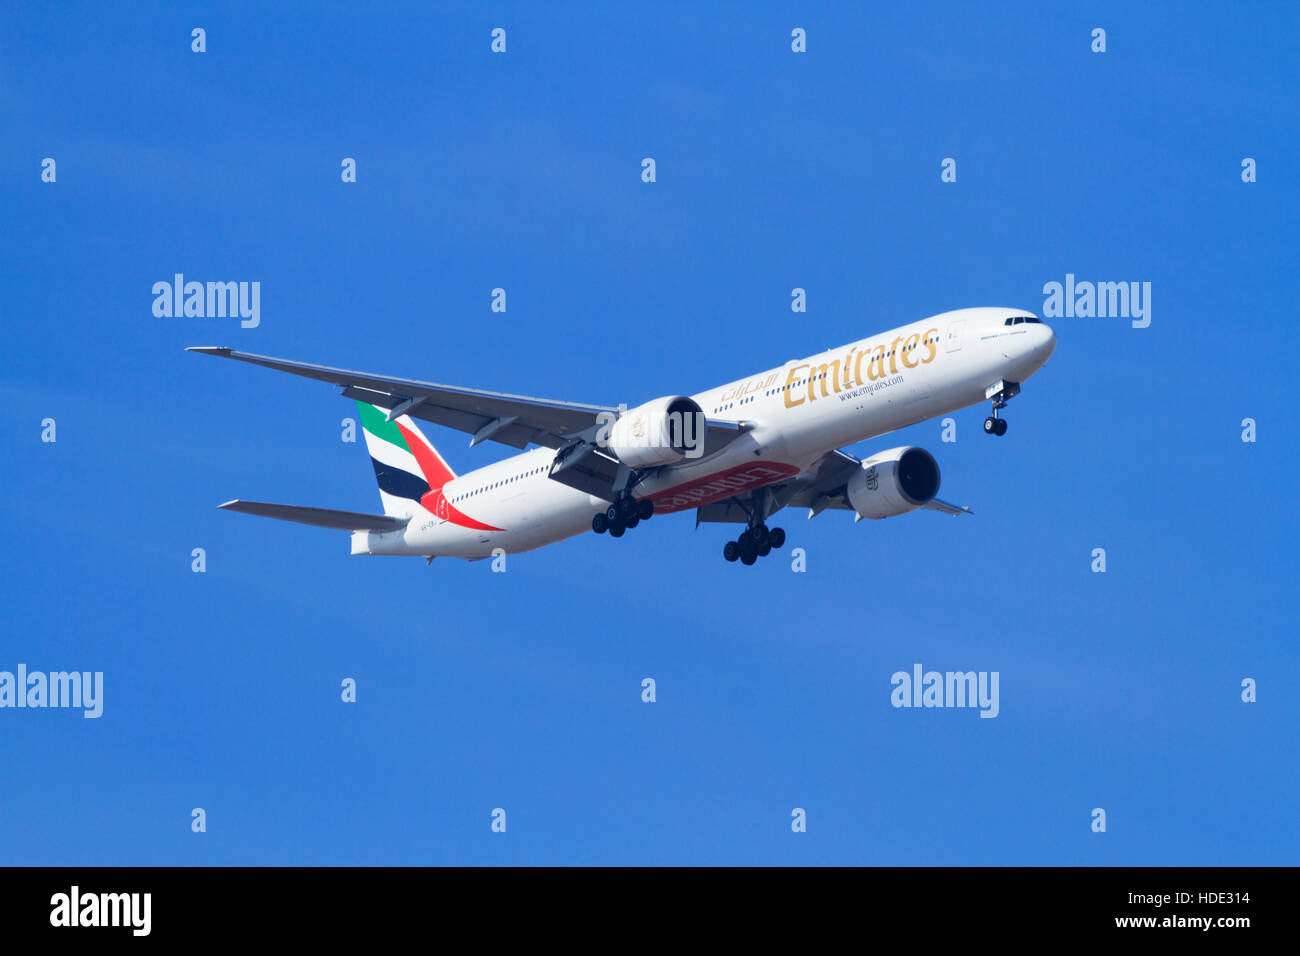 Boeing 777-36N, A6-EBJ of Emirates airlines on approach to land at Larnaca airport, Cyprus. Stock Photo